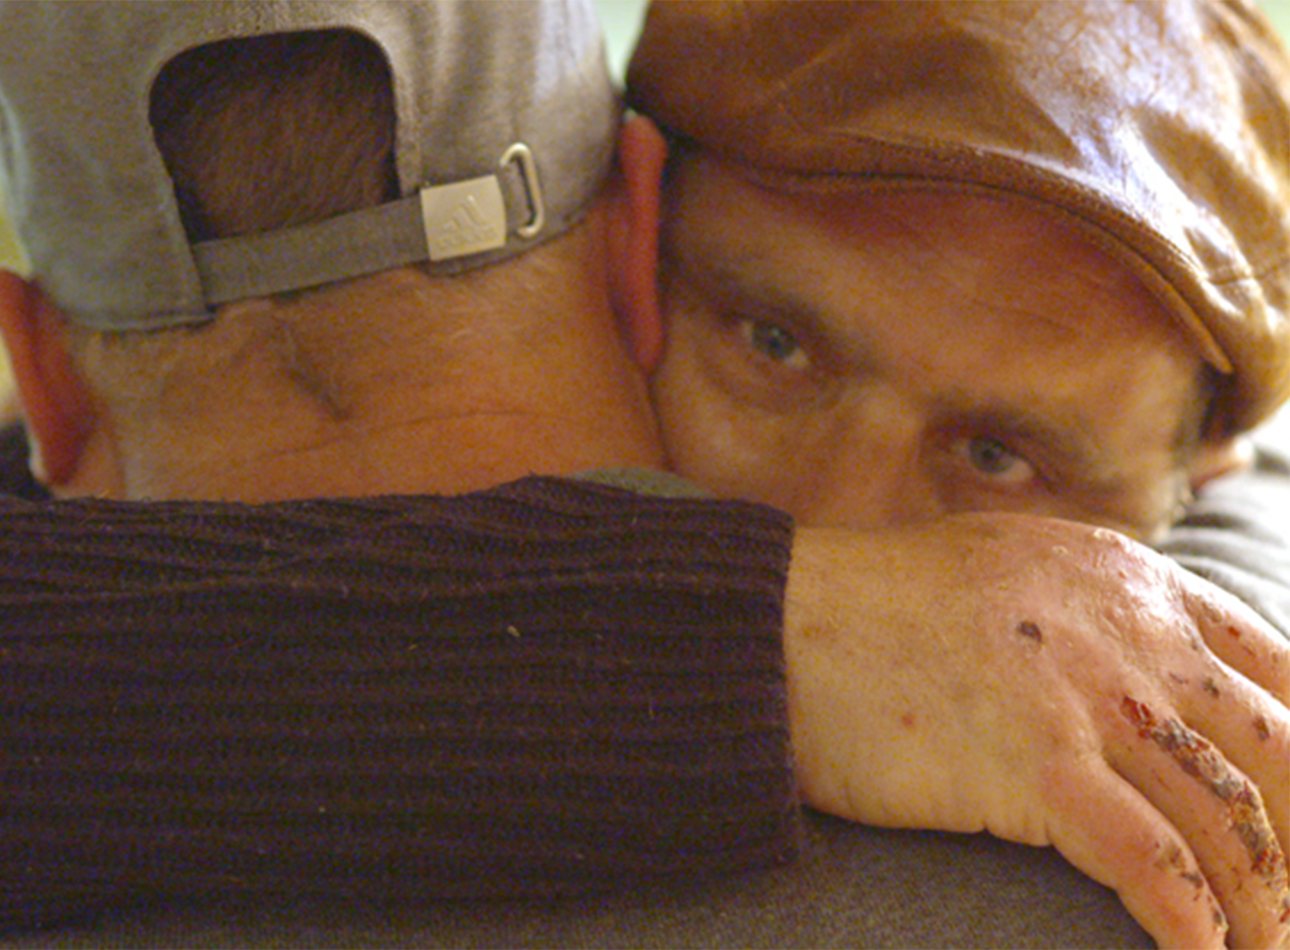 Two men in hats hugging, the visible hand is scabbed over in places